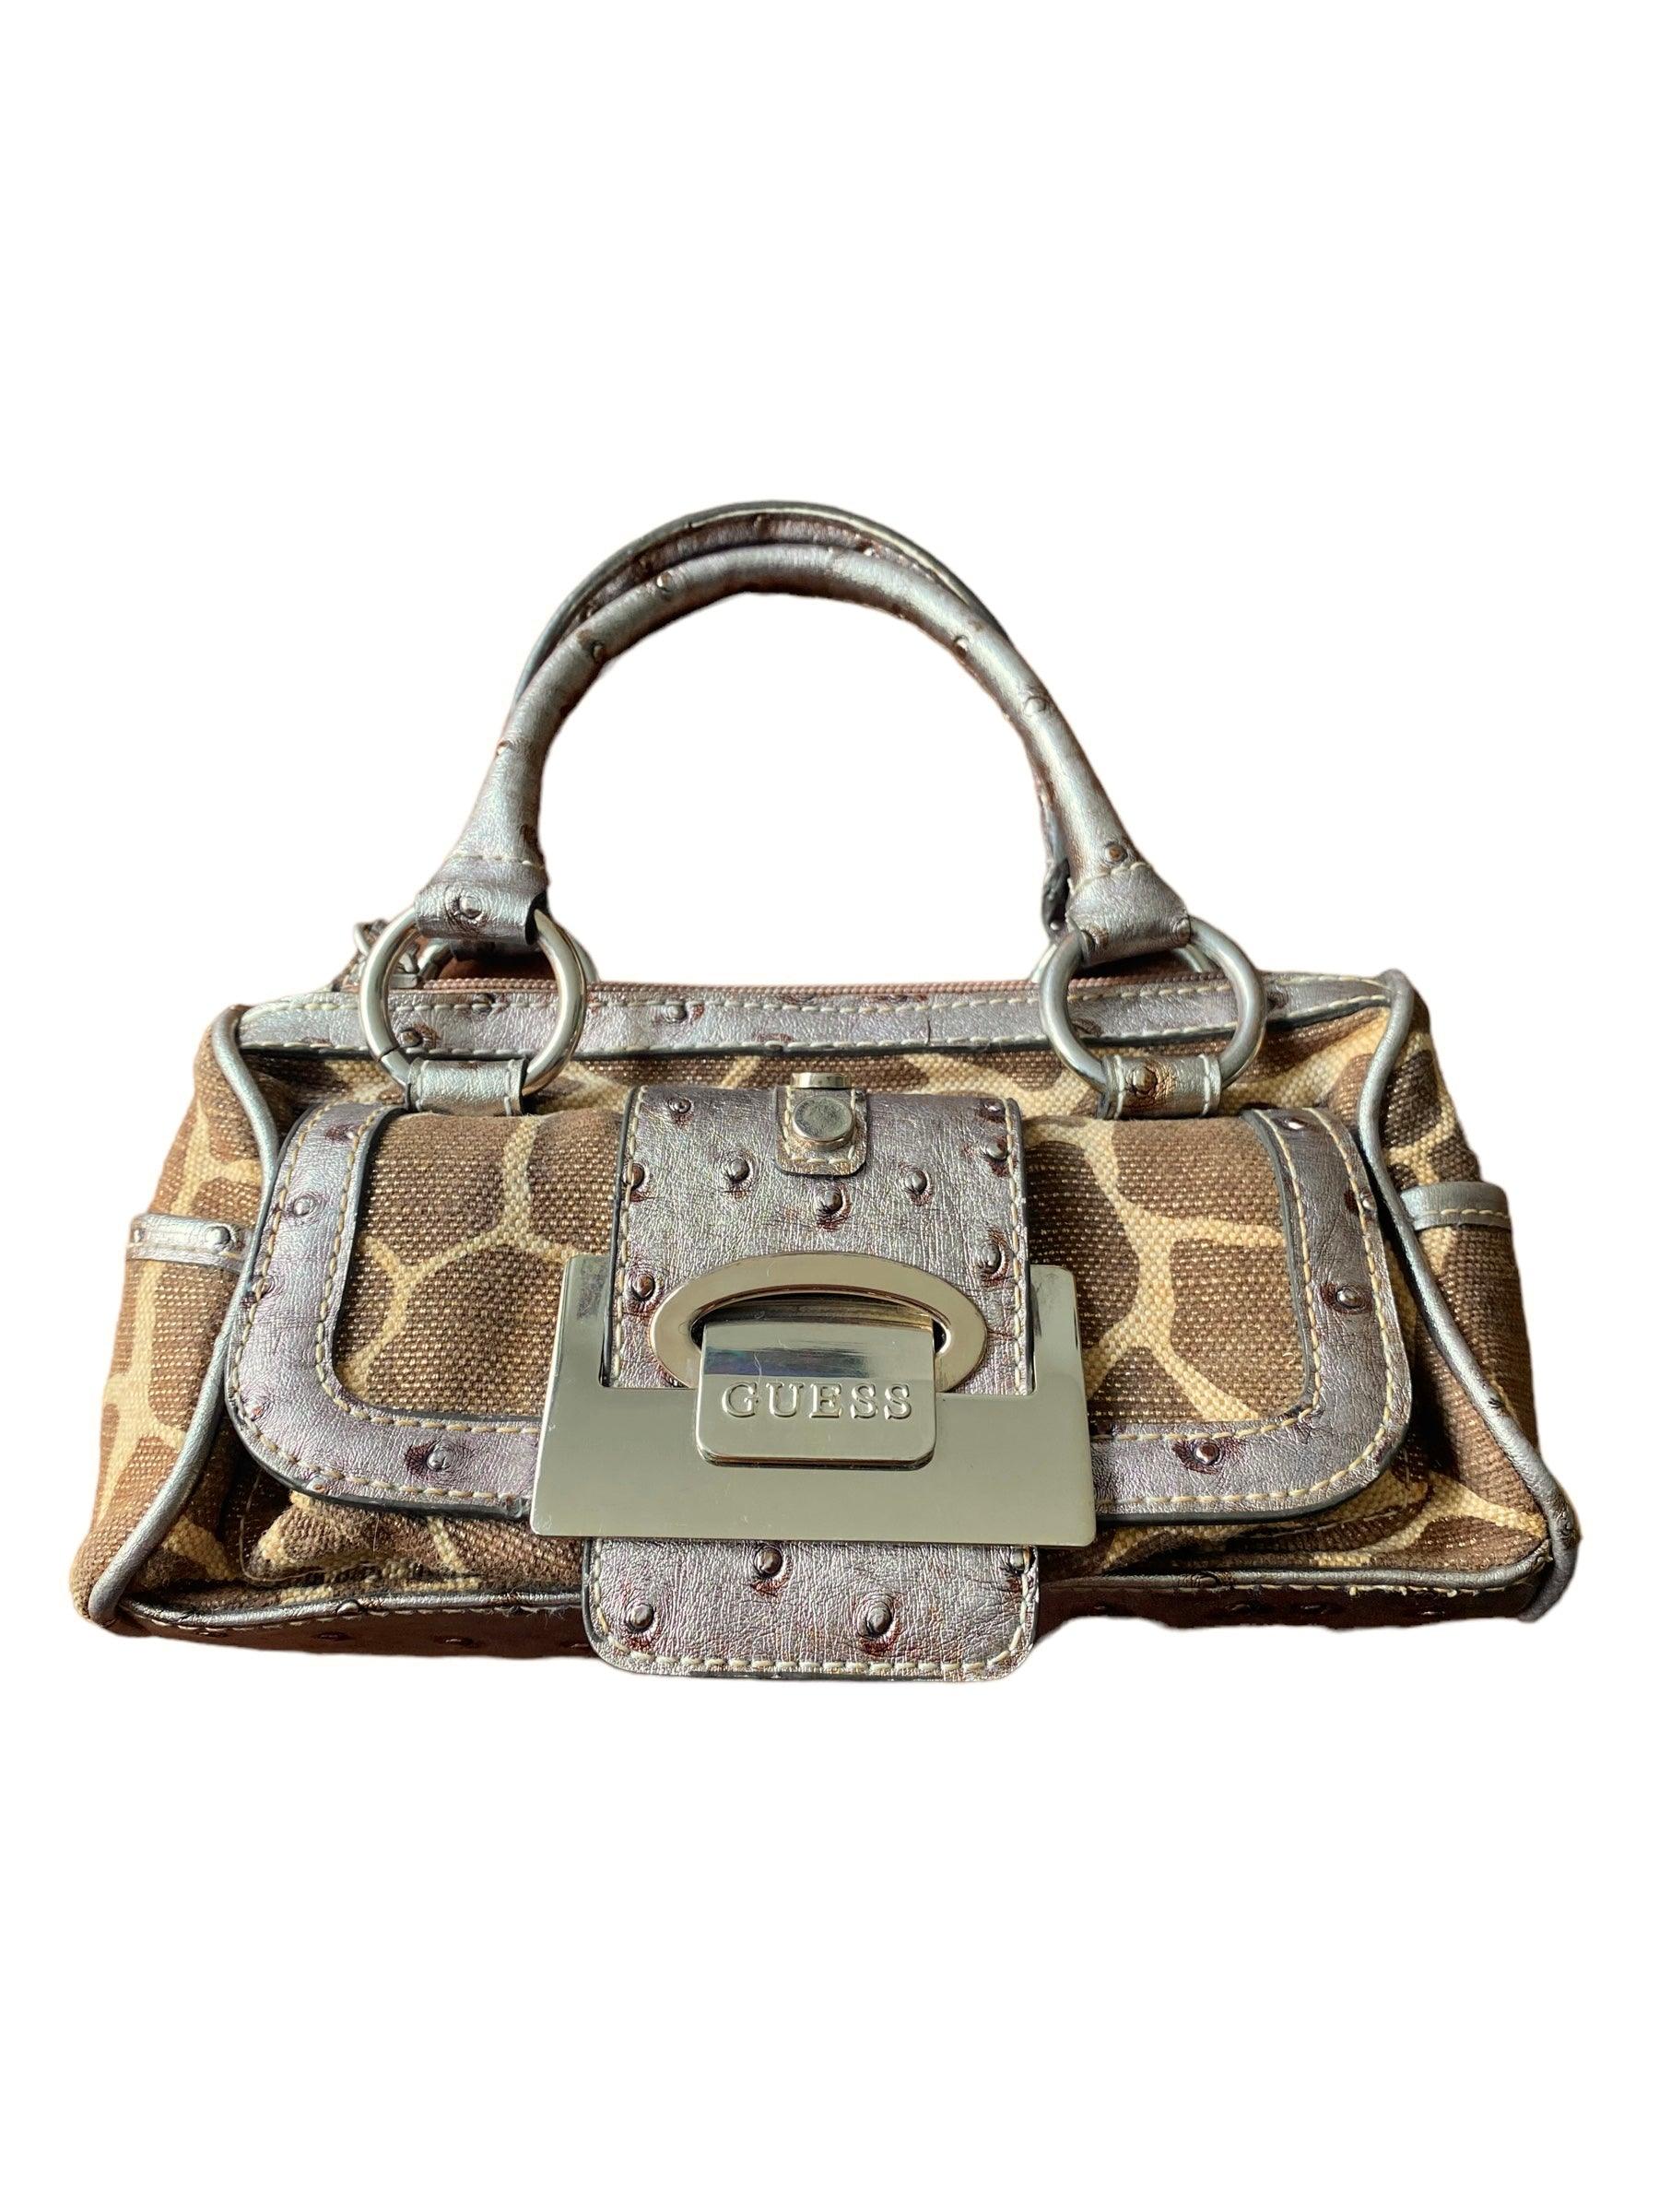 THE ICONIC GUESS VINTAGE BAGS ARE BACK - Numéro Netherlands